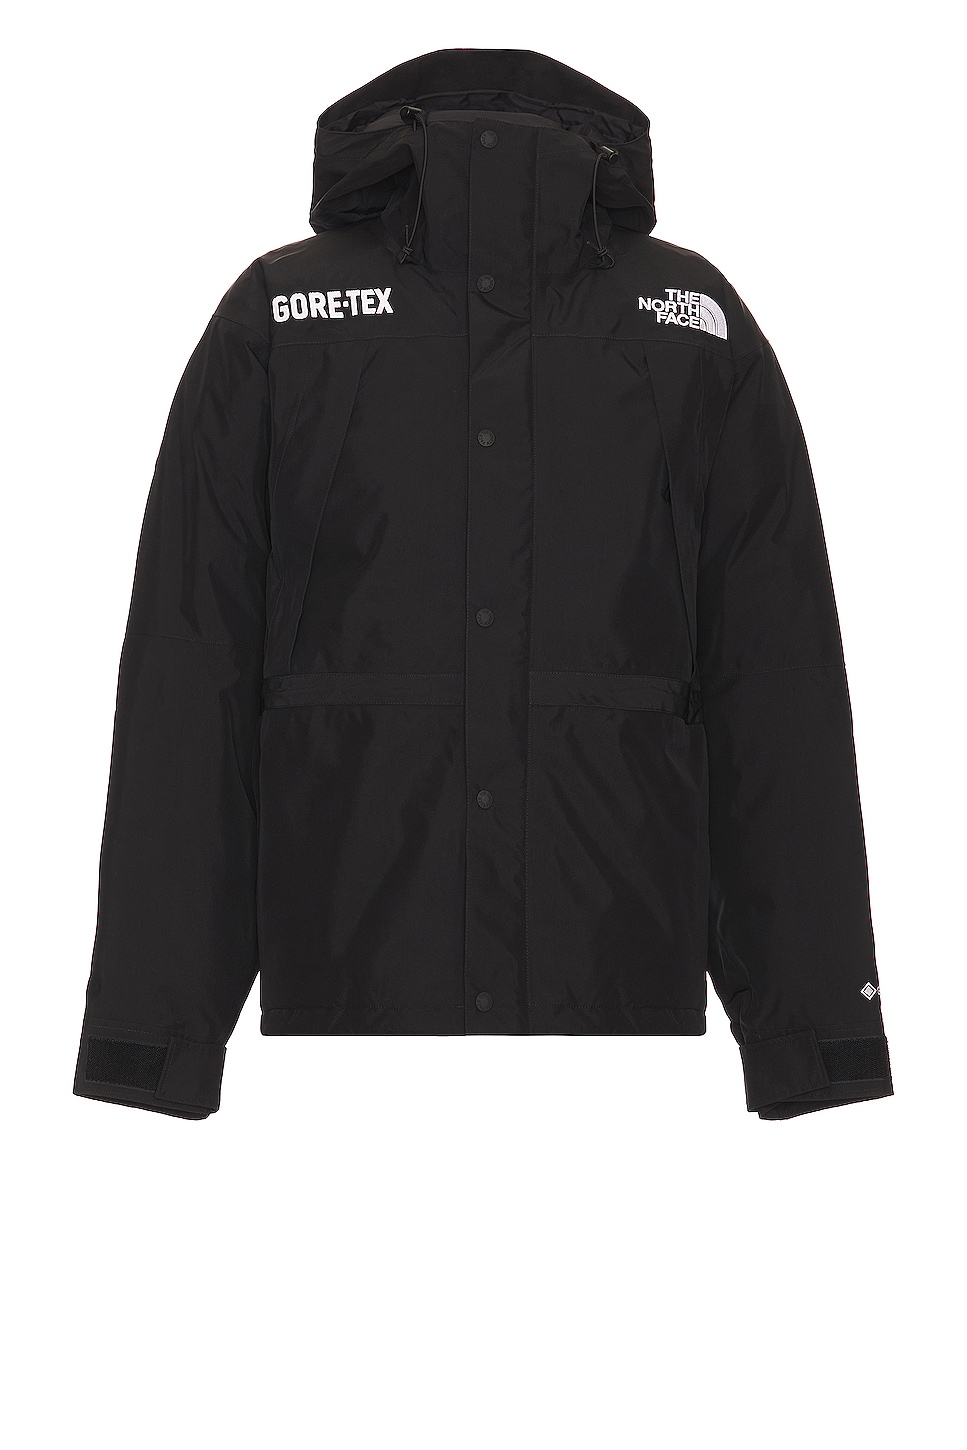 The North Face S Gtx Mountain Guide Insulated Jacket in Tnf Black | FWRD